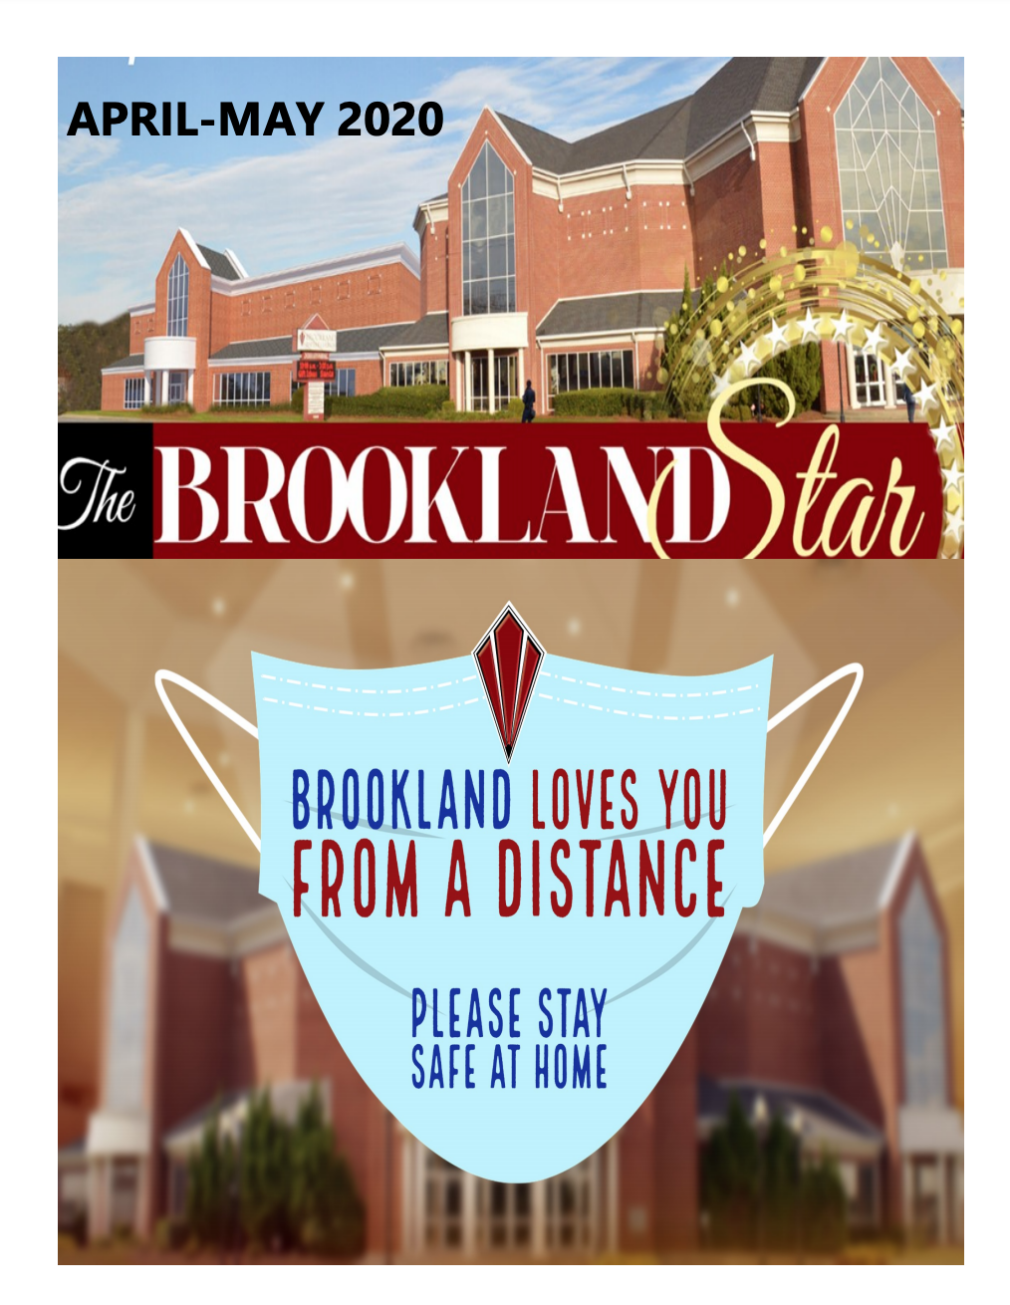 The Brookland Star April-May 2020 Edition